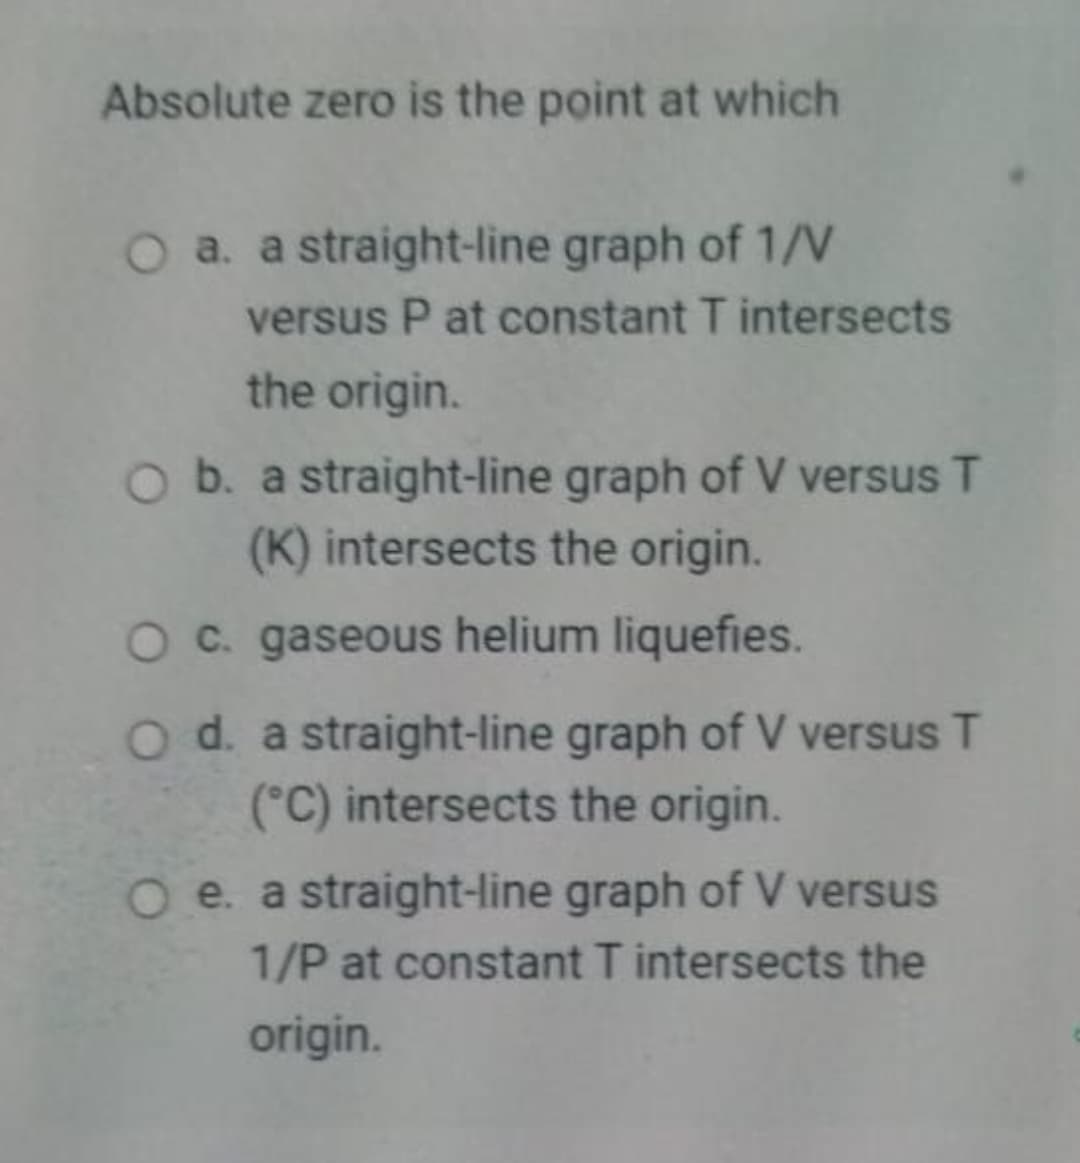 Absolute zero is the point at which
O a. a straight-line graph of 1/V
versus P at constant T intersects
the origin.
O b. a straight-line graph of V versus T
(K) intersects the origin.
Oc. gaseous helium liquefies.
Od. a straight-line graph of V versus T
(°C) intersects the origin.
O e. a straight-line graph of V versus
1/P at constant T intersects the
origin.
